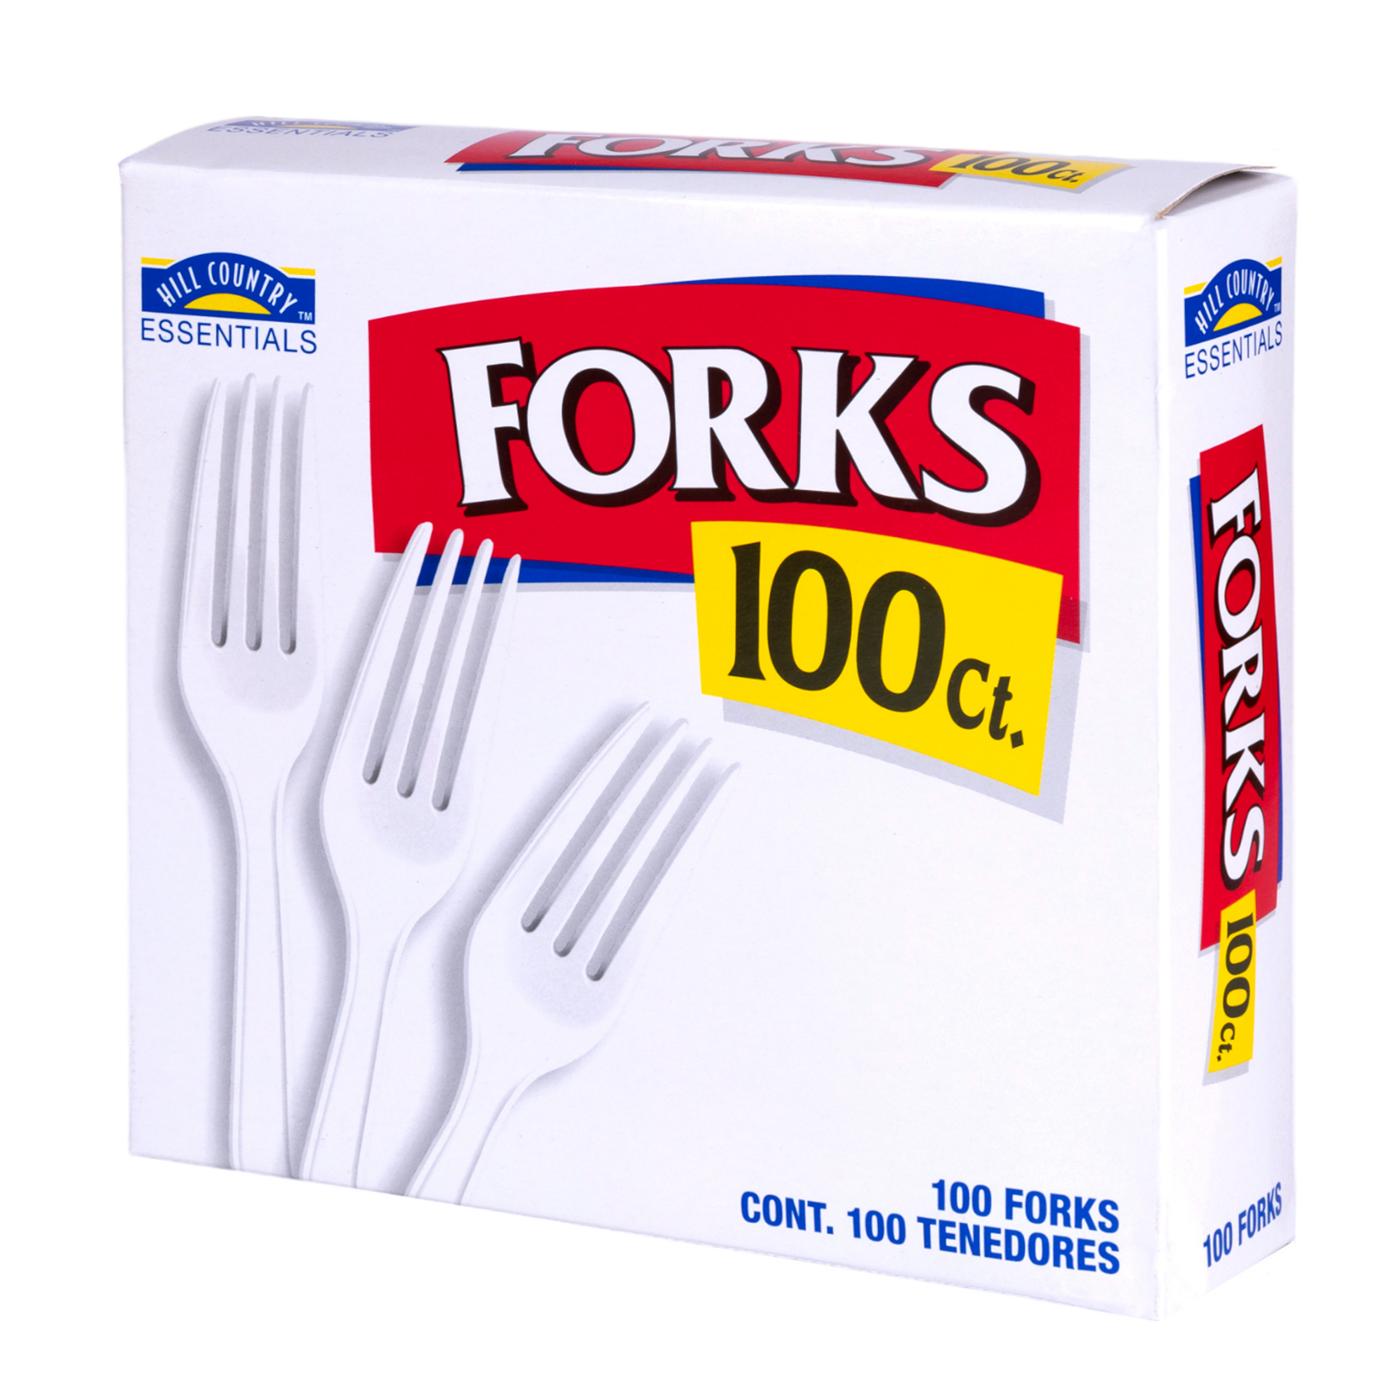 Hill Country Essentials Plastic Forks - White; image 3 of 3